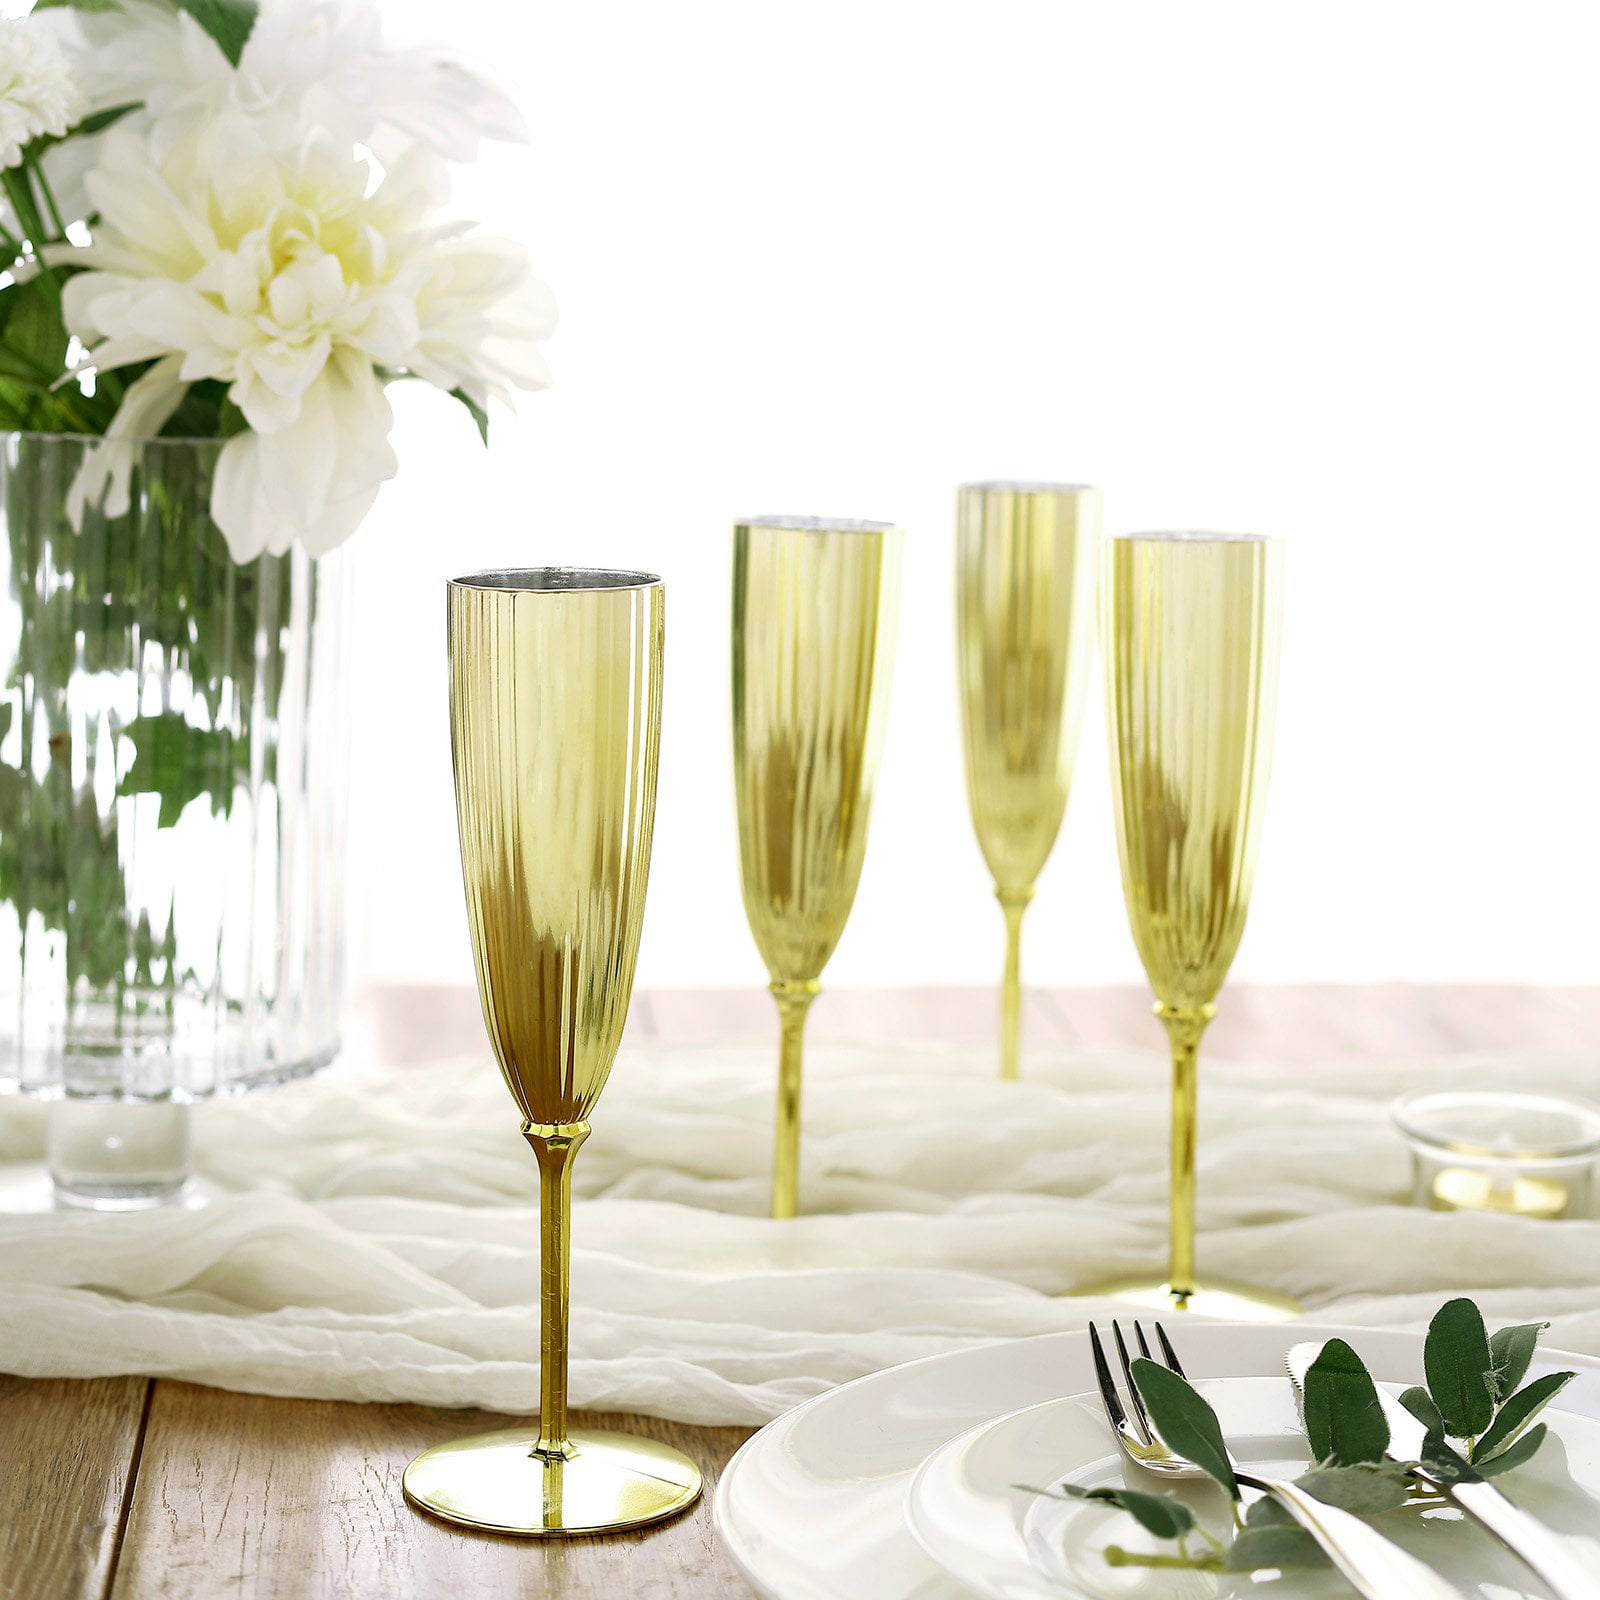 50 Gold Champagne Glasses Tent Style Ivory place cards 4.25" x 1.75 folded 